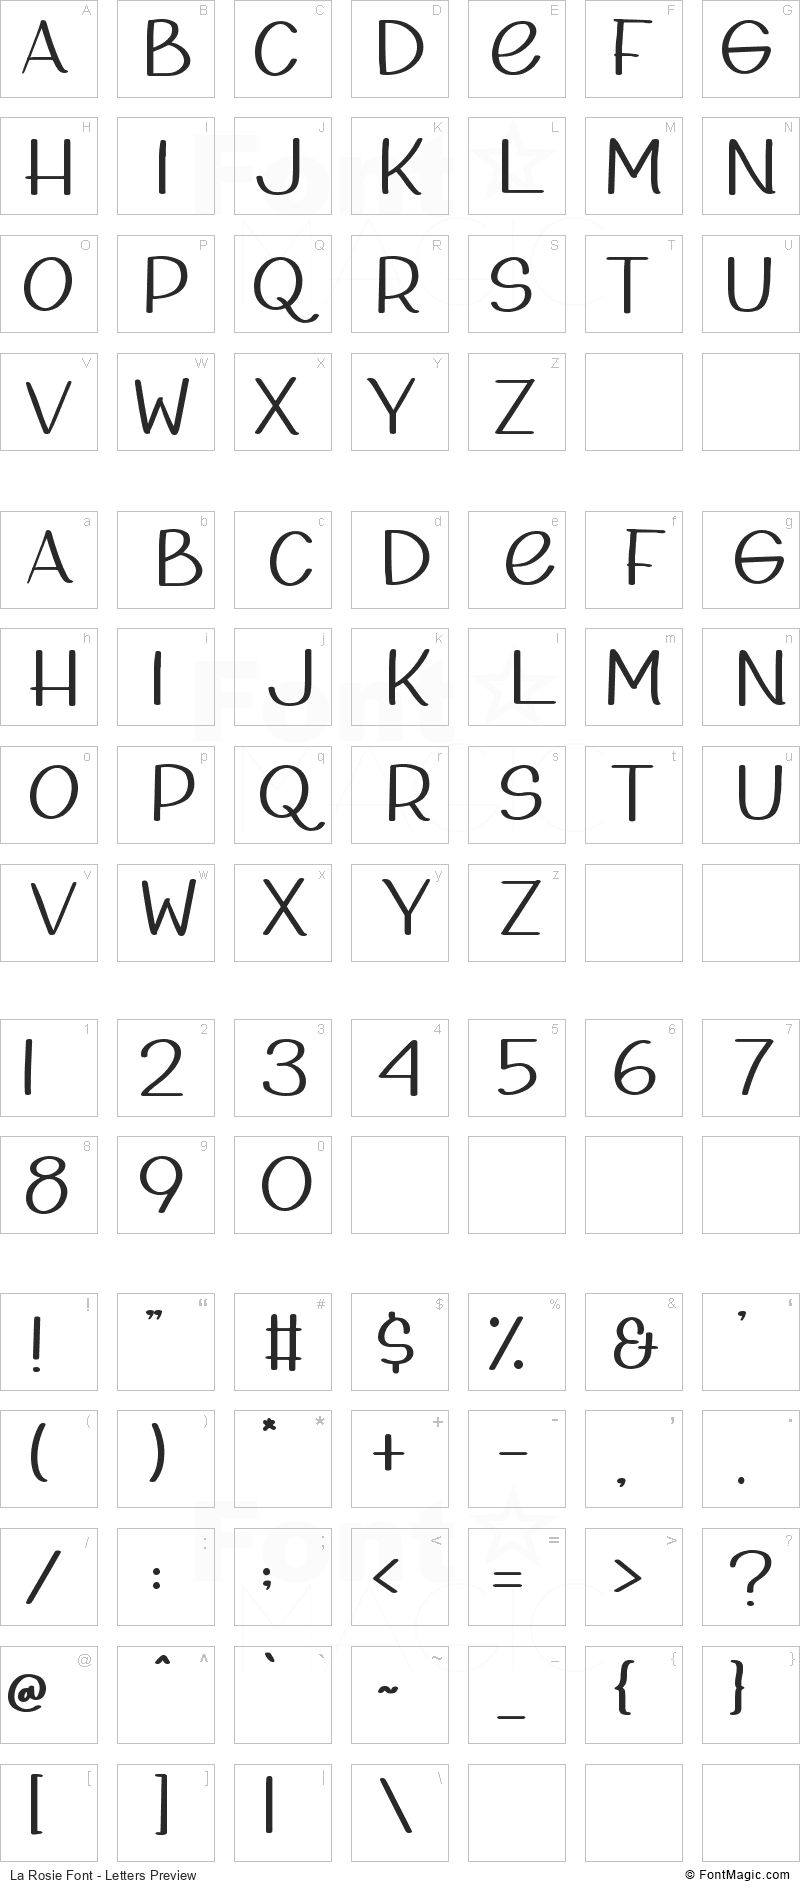 La Rosie Font - All Latters Preview Chart